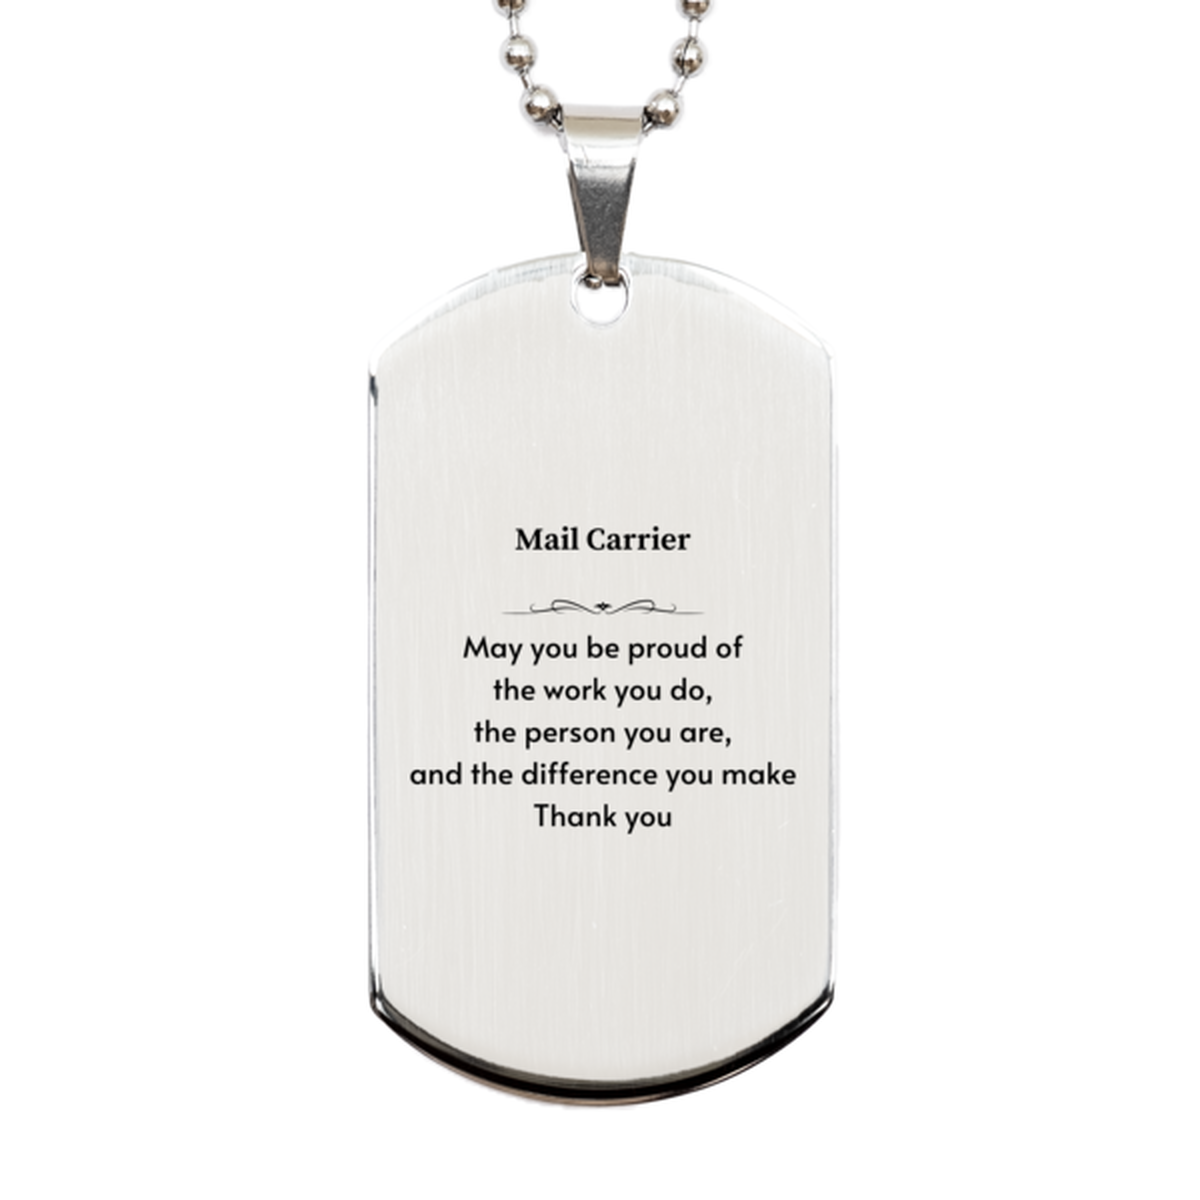 Heartwarming Silver Dog Tag Retirement Coworkers Gifts for Mail Carrier, Mail Carrier May You be proud of the work you do, the person you are Gifts for Boss Men Women Friends